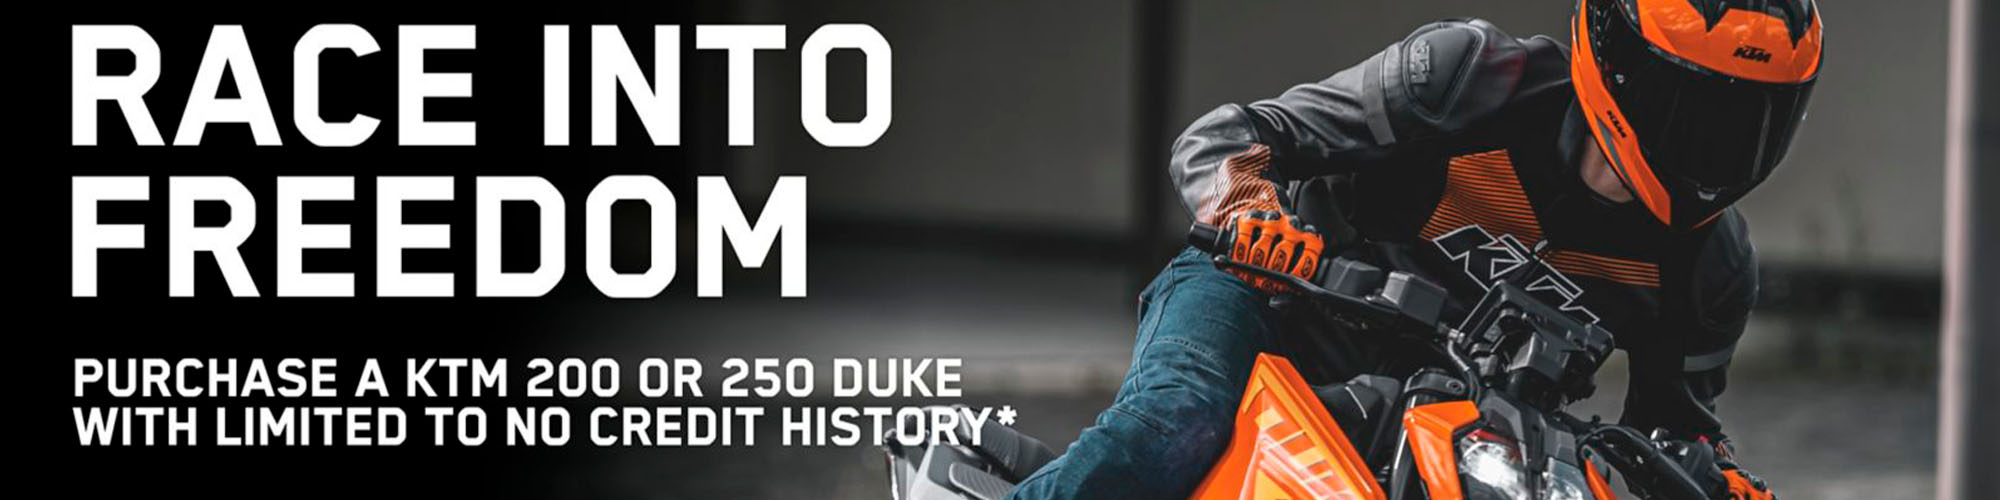 KTM - RACE INTO FREEDOM at Indian Motorcycle of Northern Kentucky